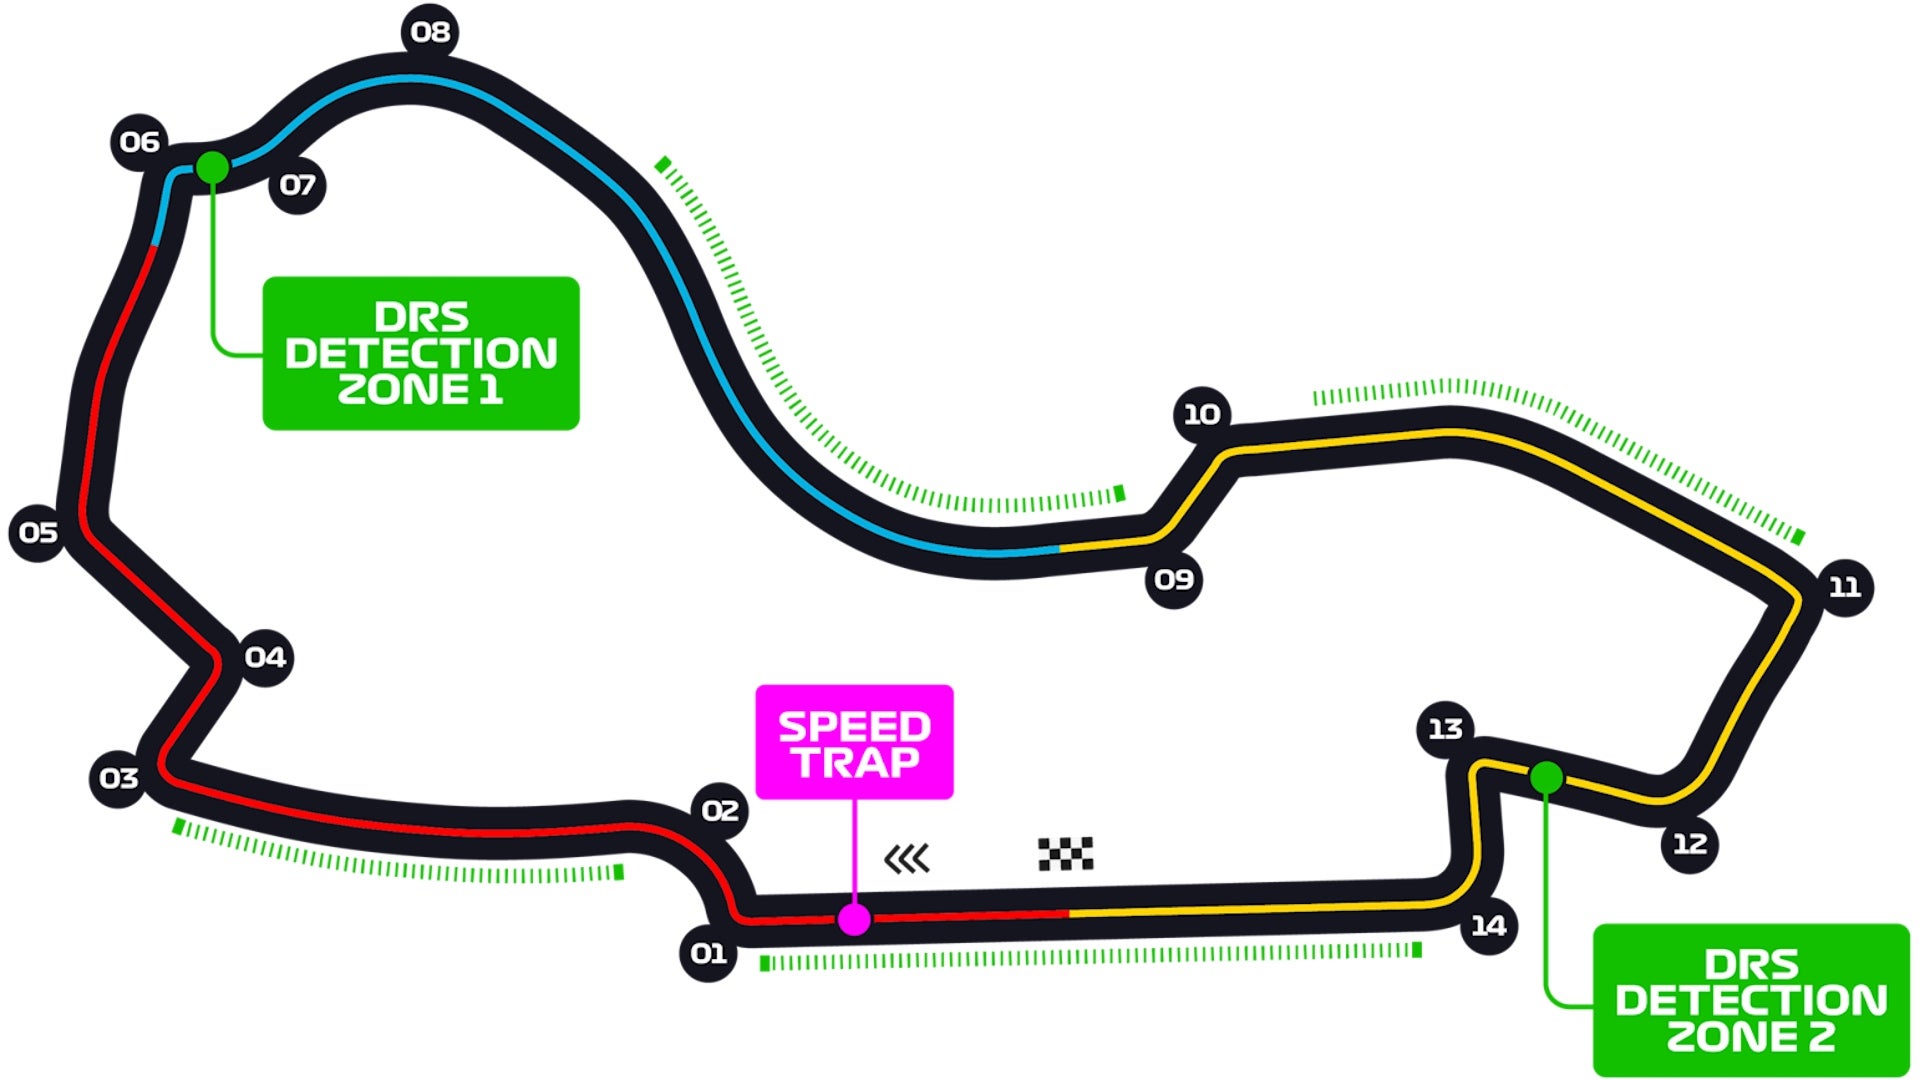 F1s Updated Australian GP Track Has Four DRS Zones for Lots of Passing